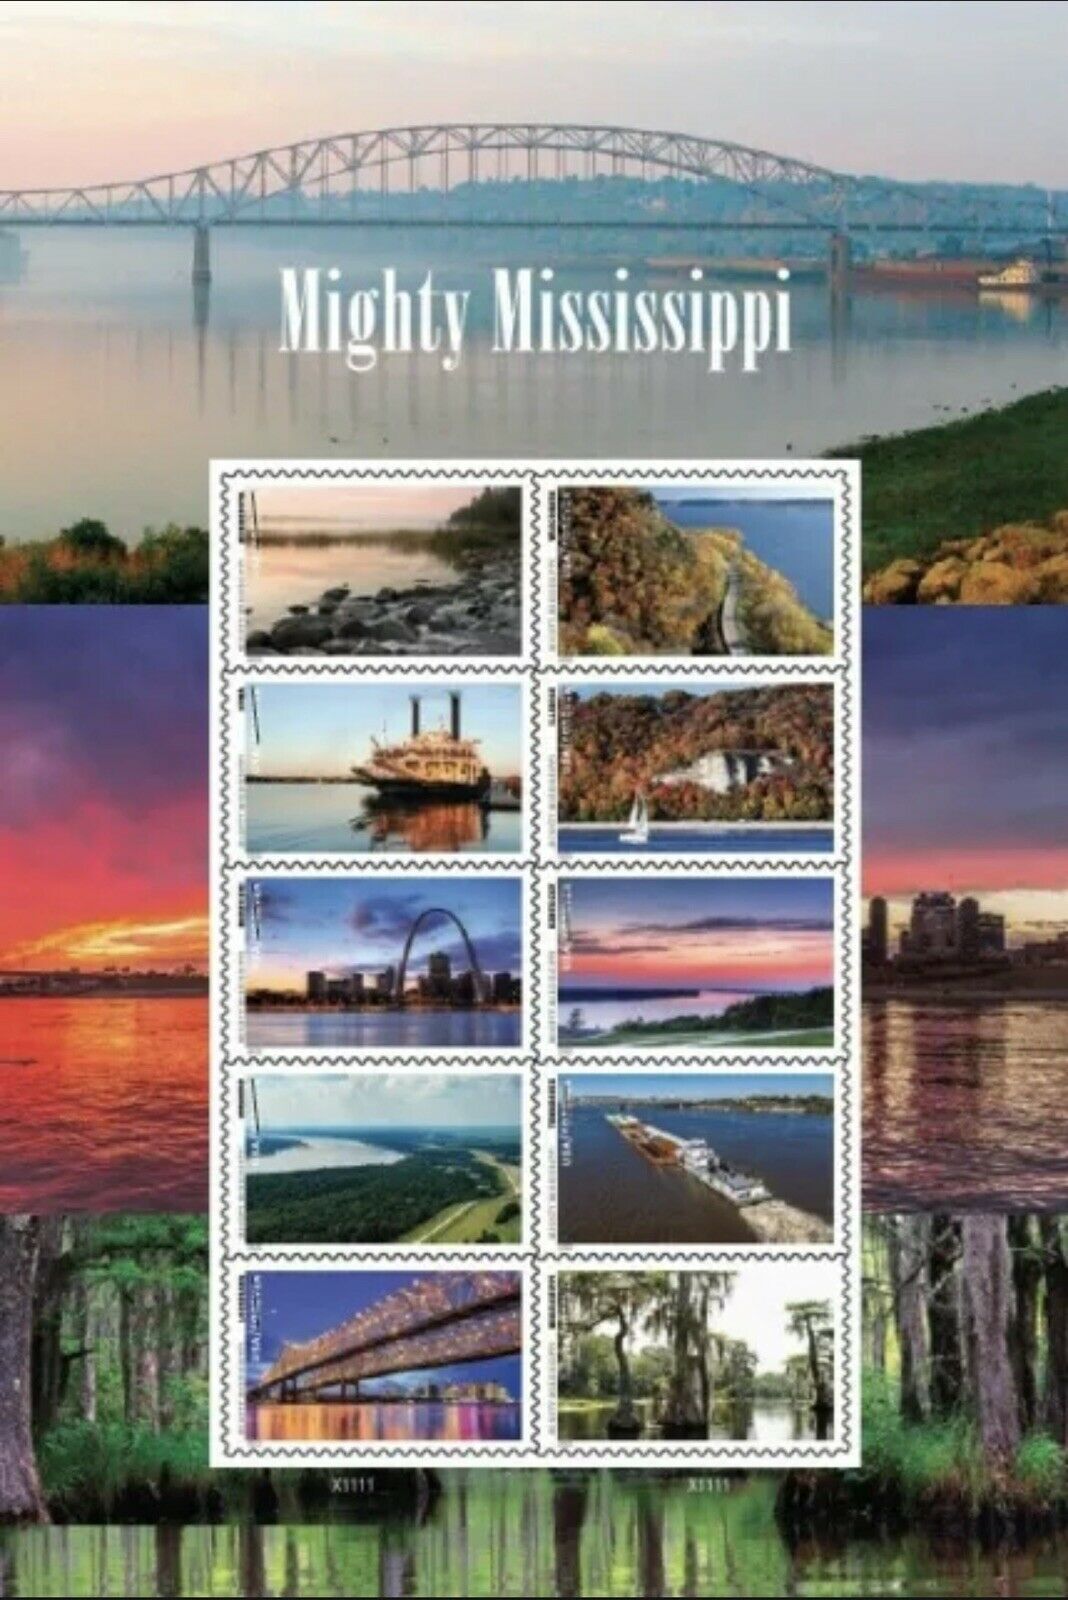 US Mighty Mississippi Sheet of 10 stamps MNH 2022 PreOrderShips 23